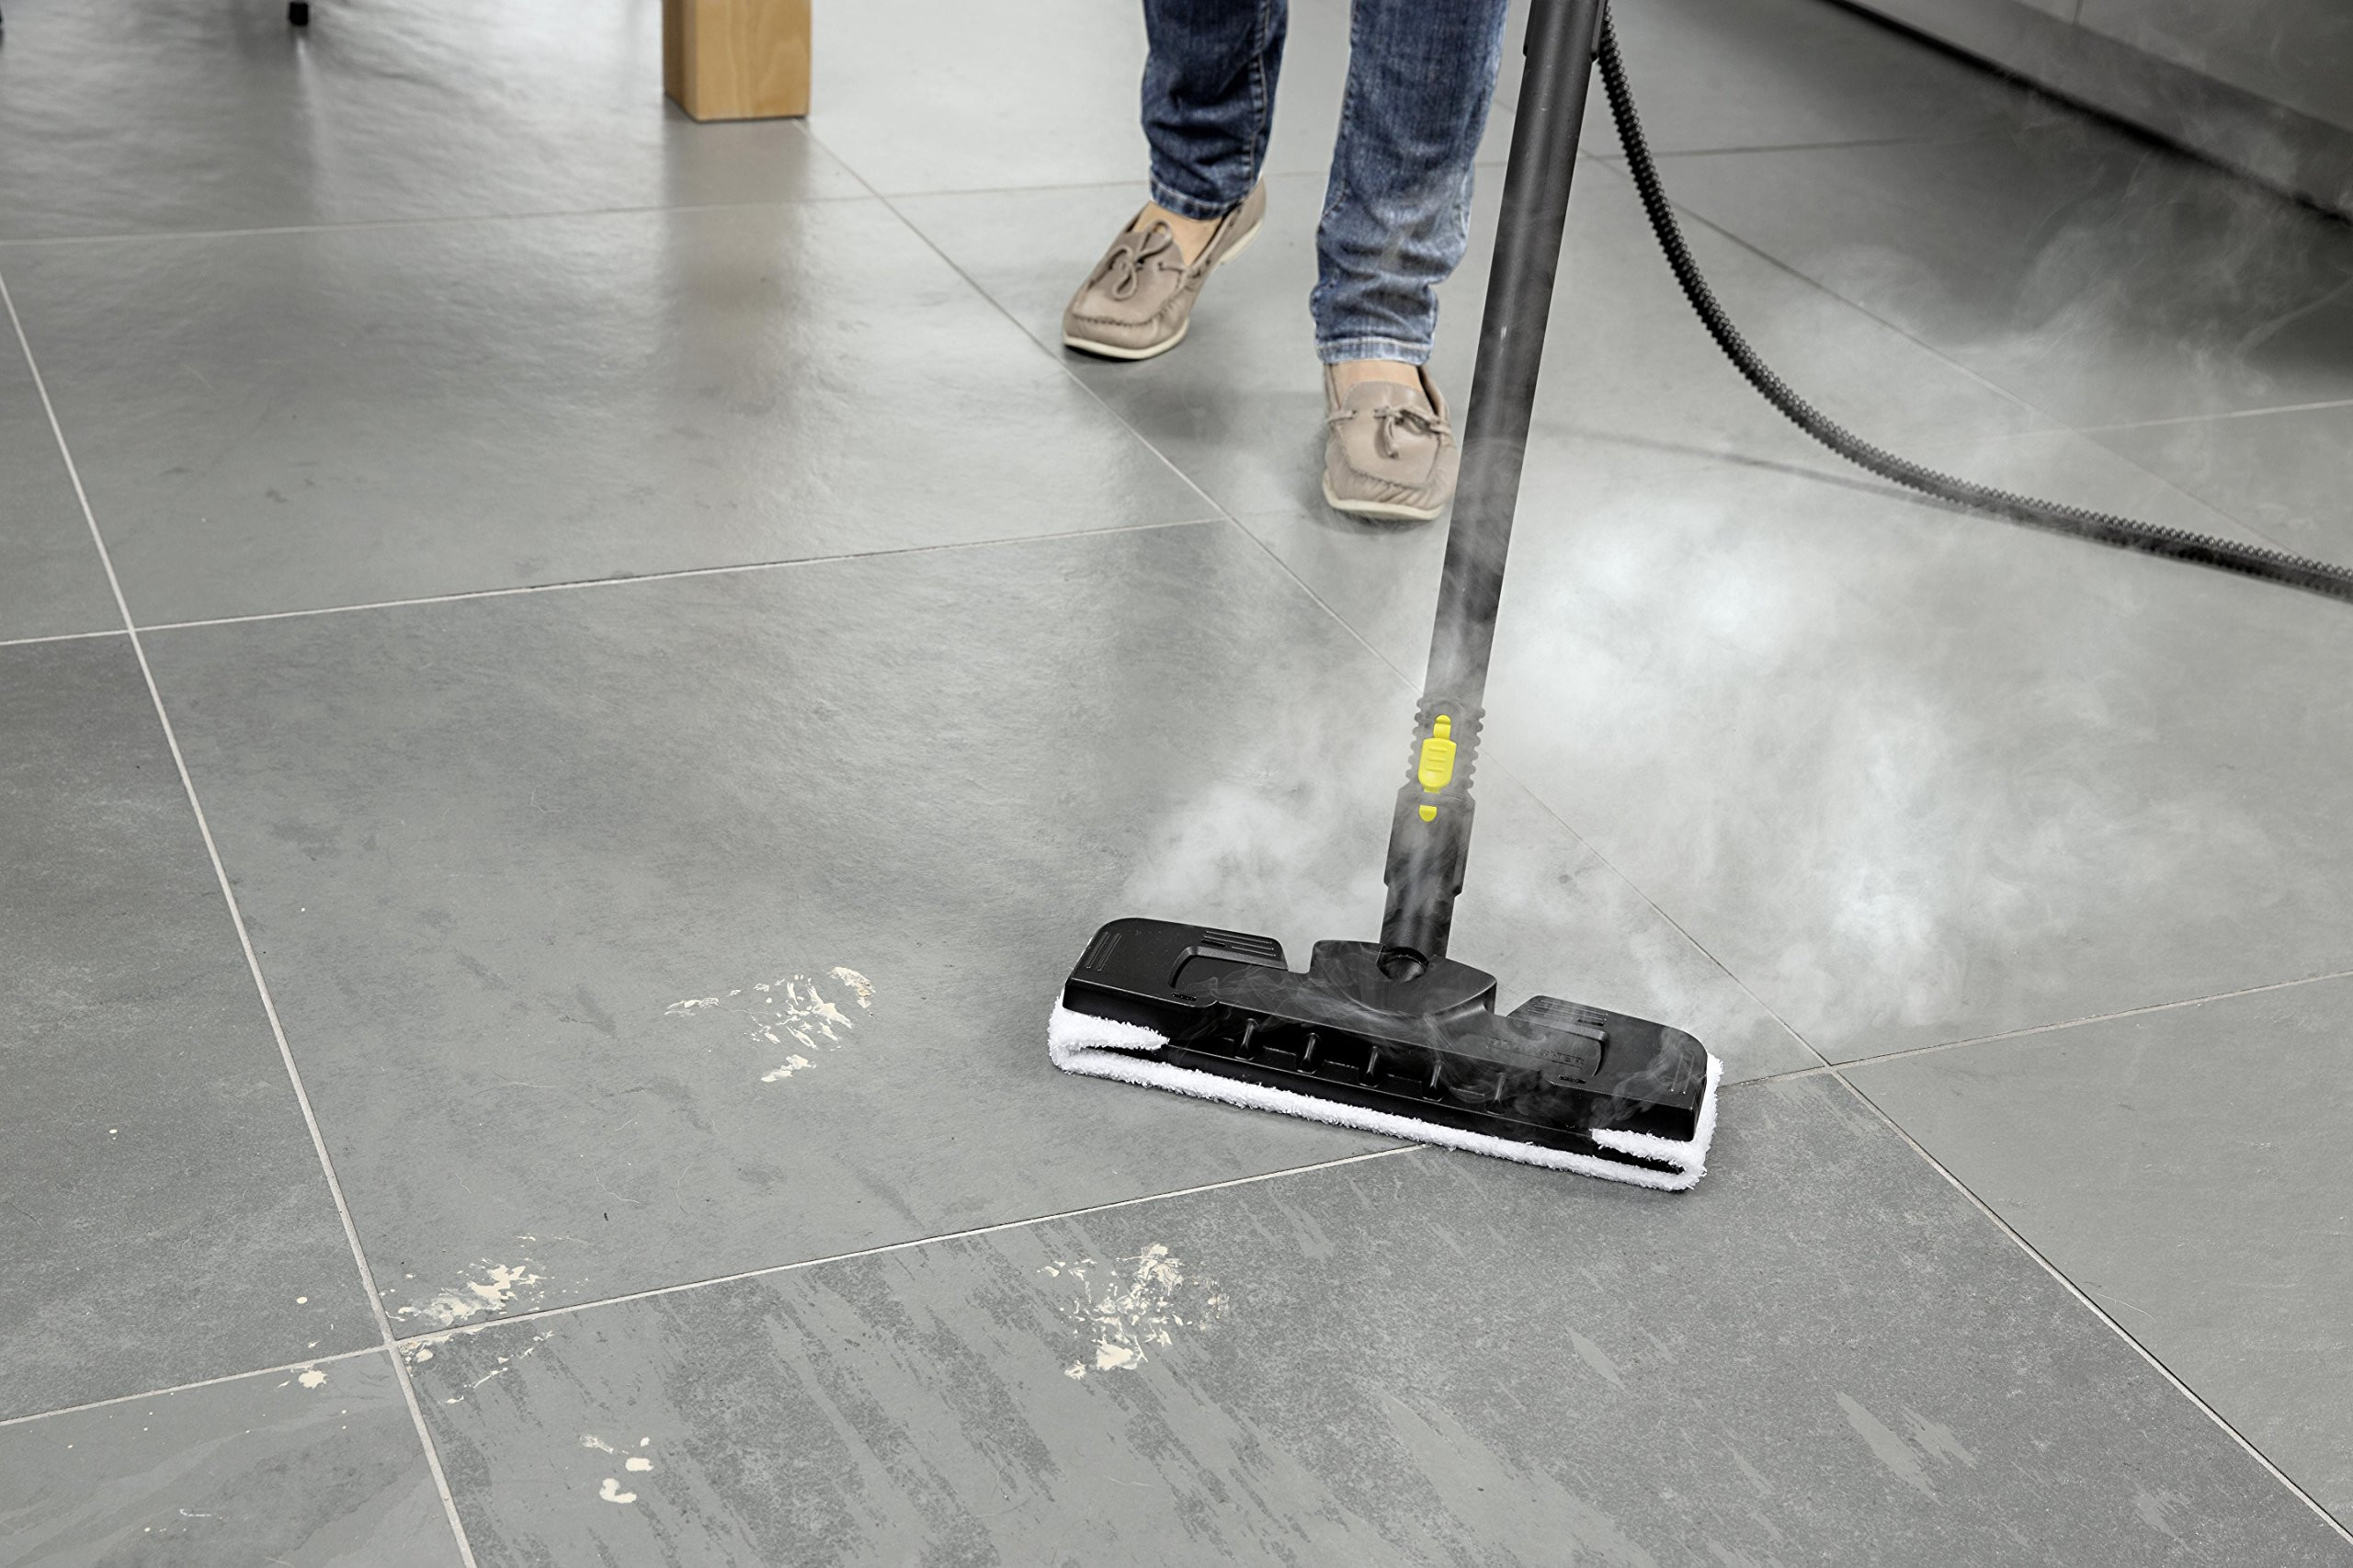 hardwood floor cleaner mop of vacuum and floor care shop amazon uk with regard to steam steam cleaners a· steam mops